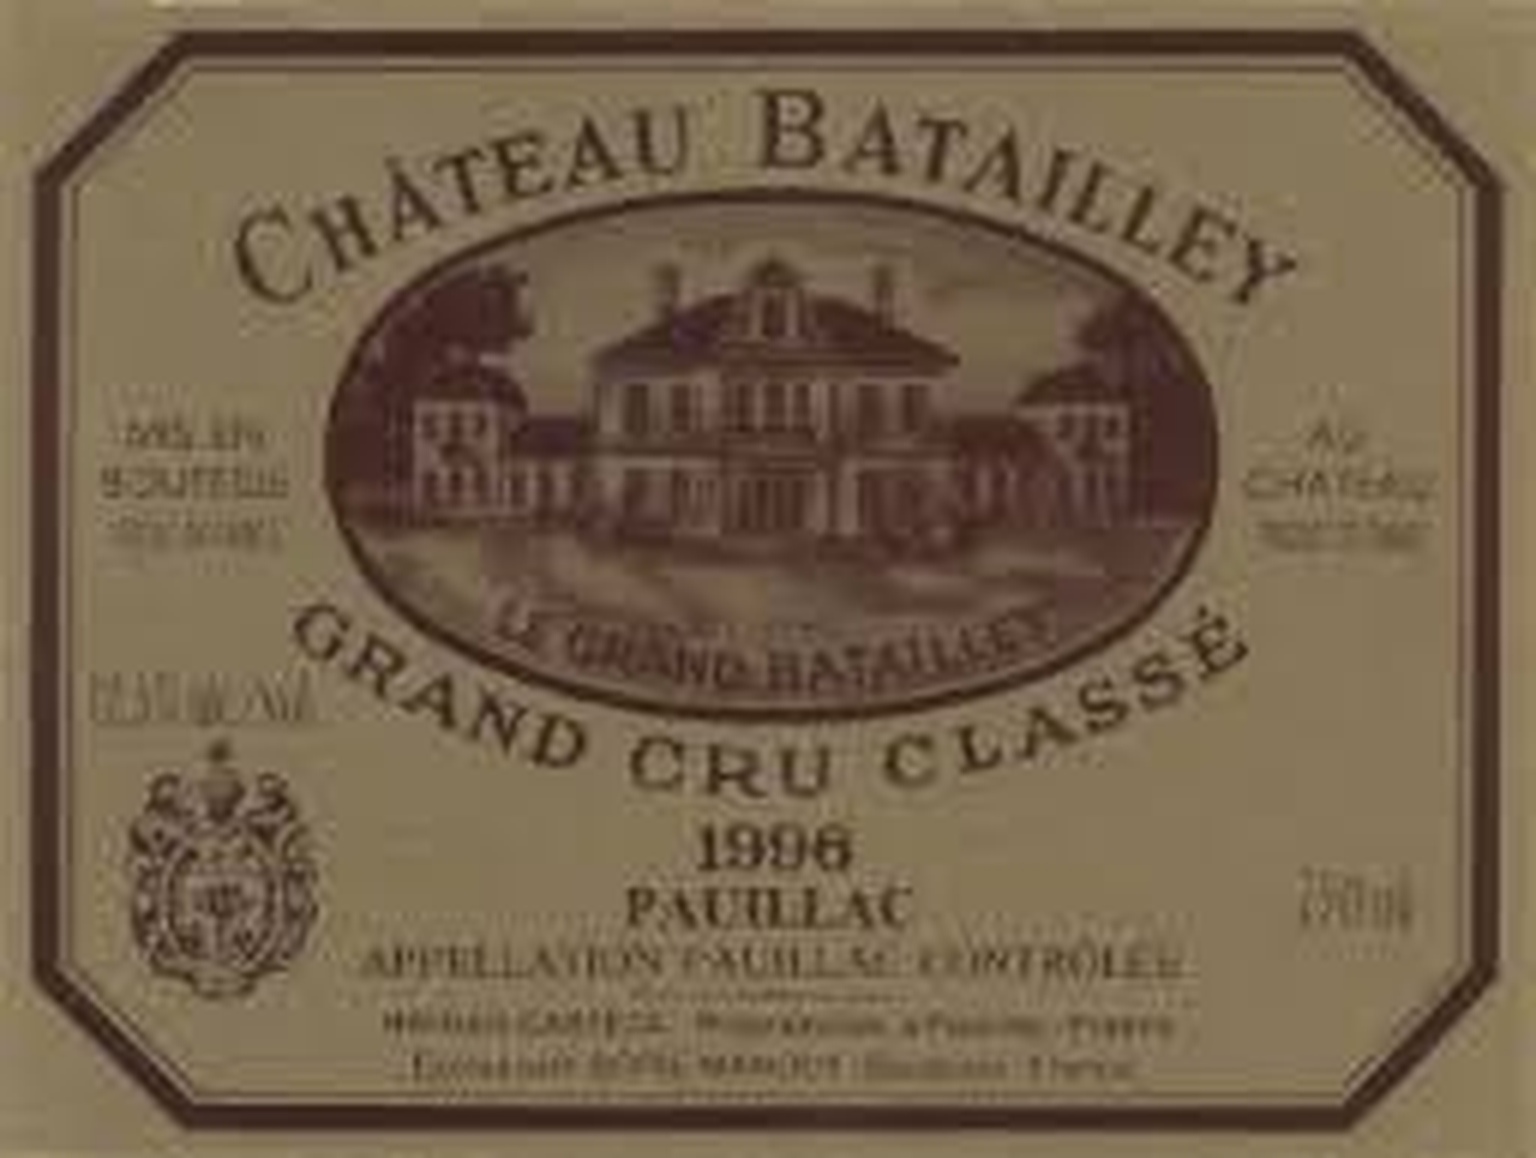 1996 Batailley, 12 bottles of 75cl